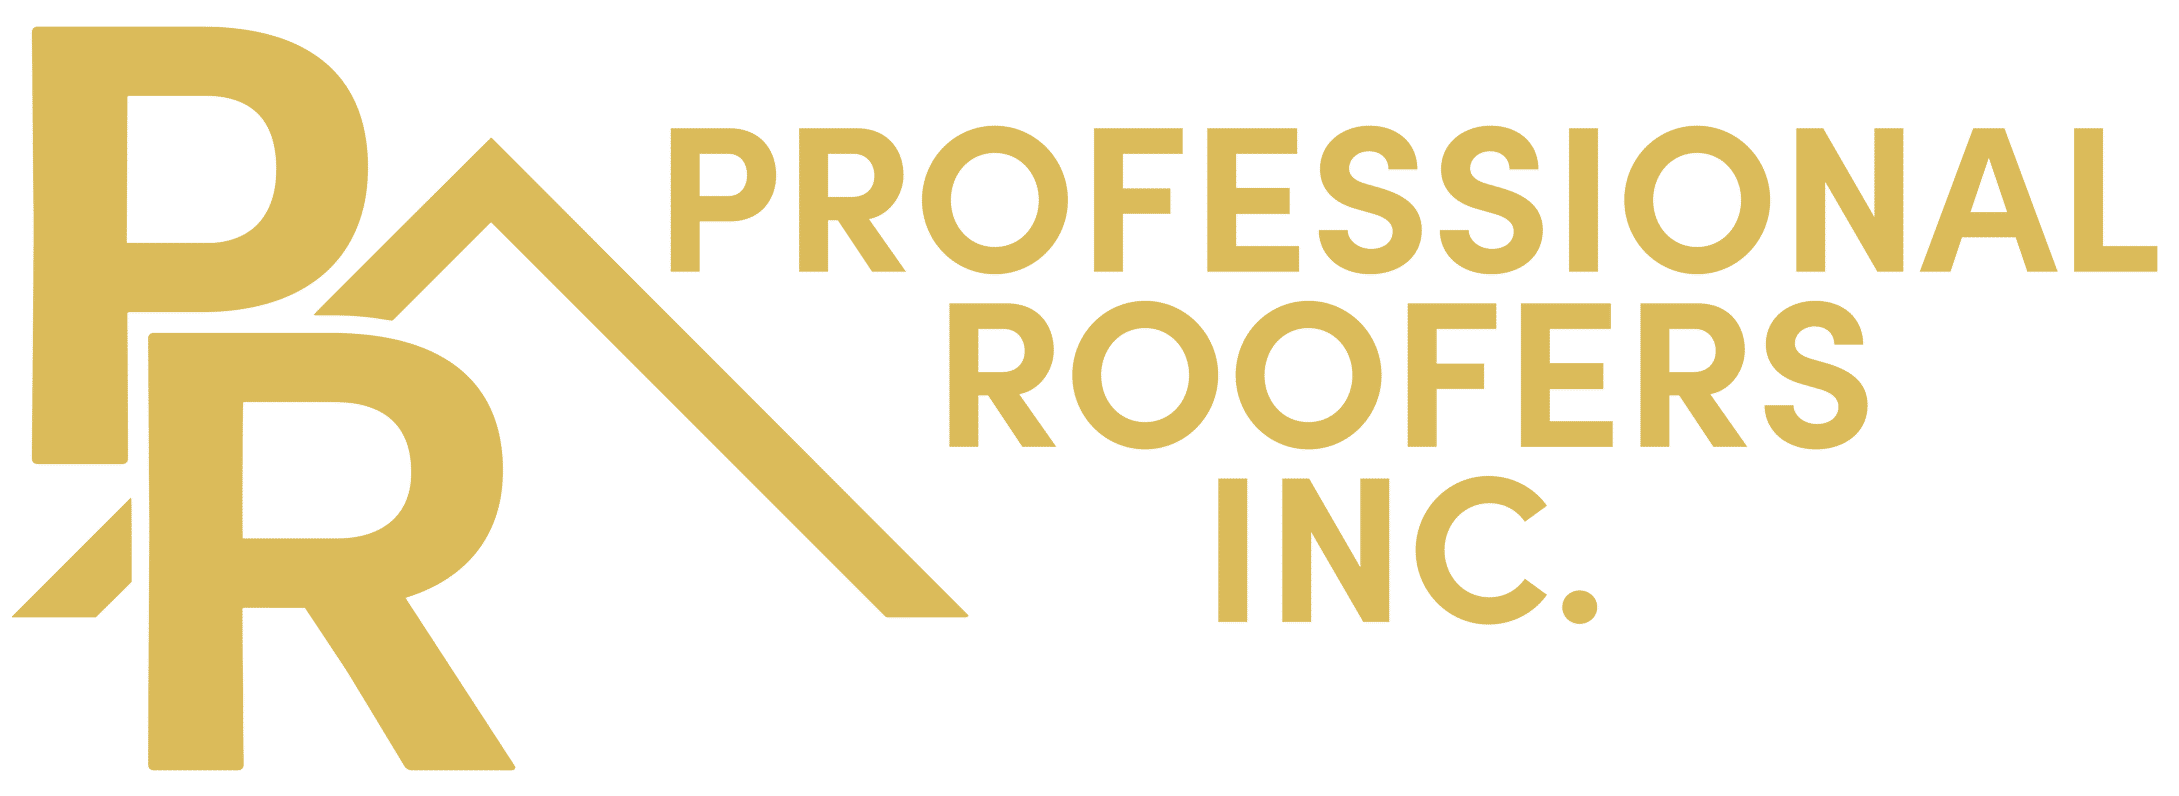 Professional Roofers, Inc. - Franklin Local Roofers